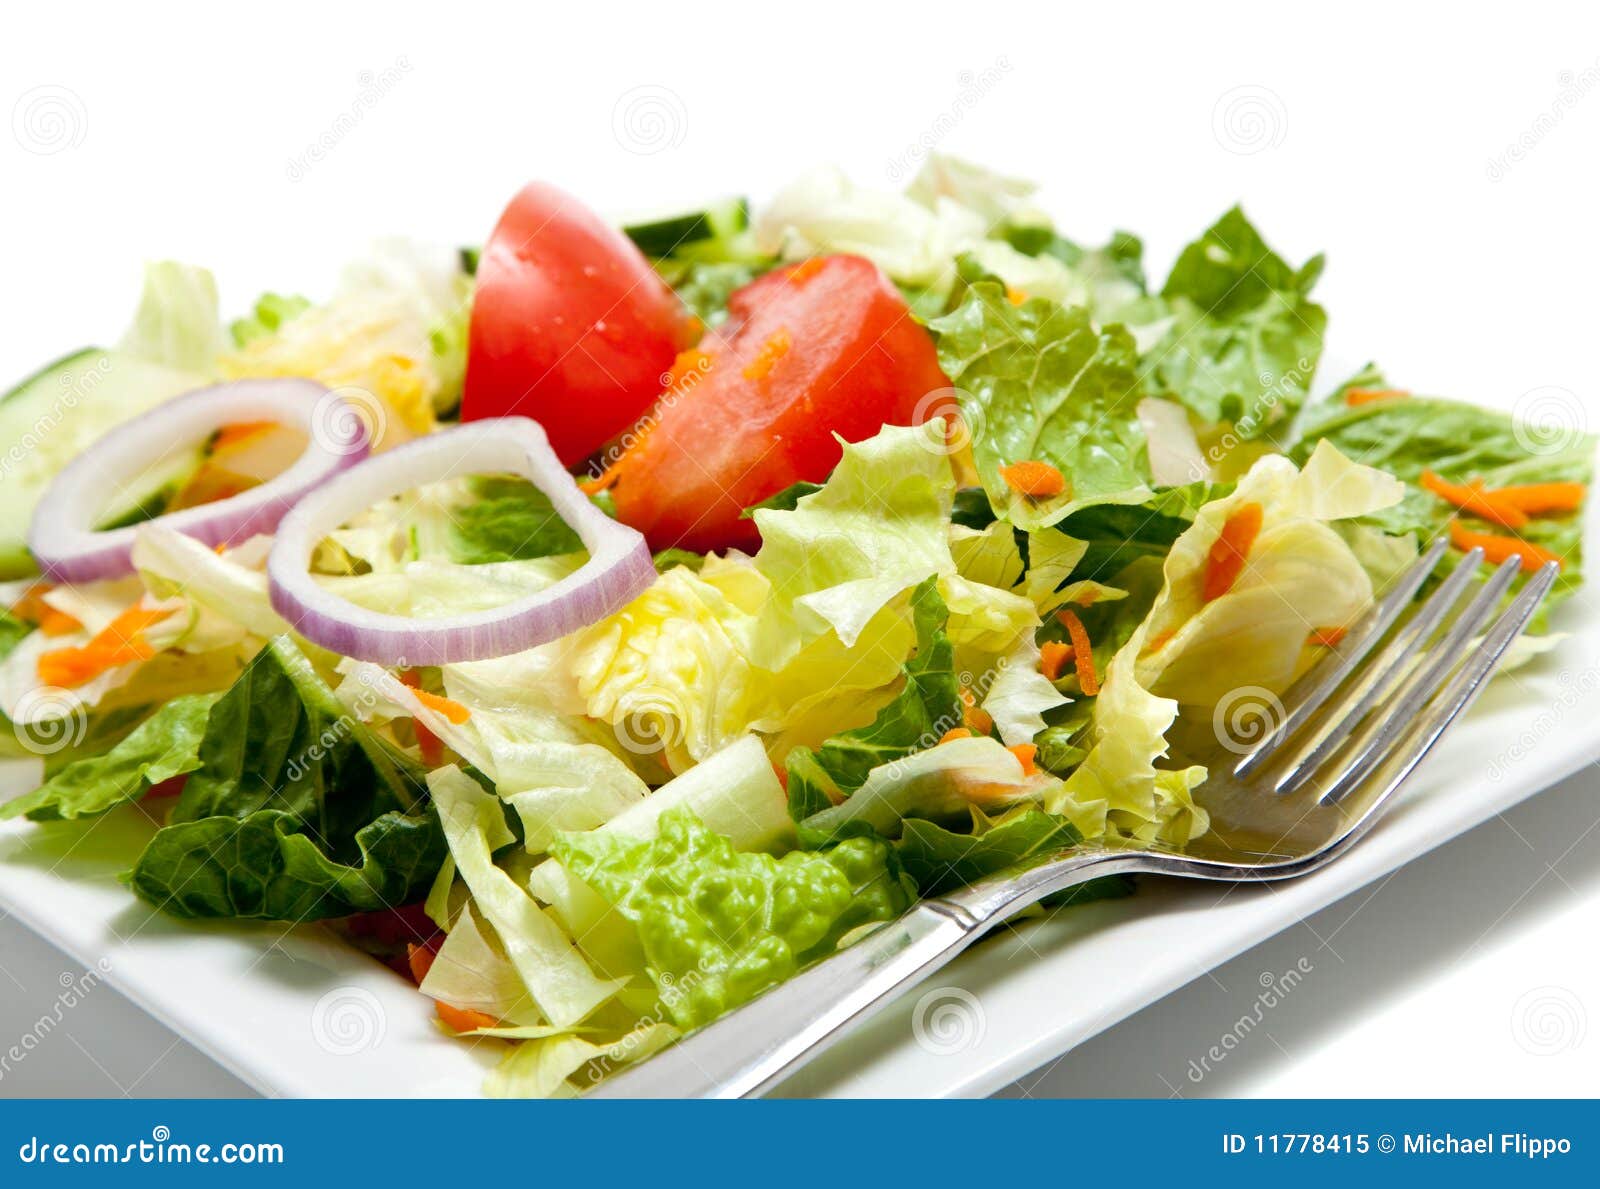 Tossed Salad On A Plate With A Fork Royalty Free Stock Photo - Image ...